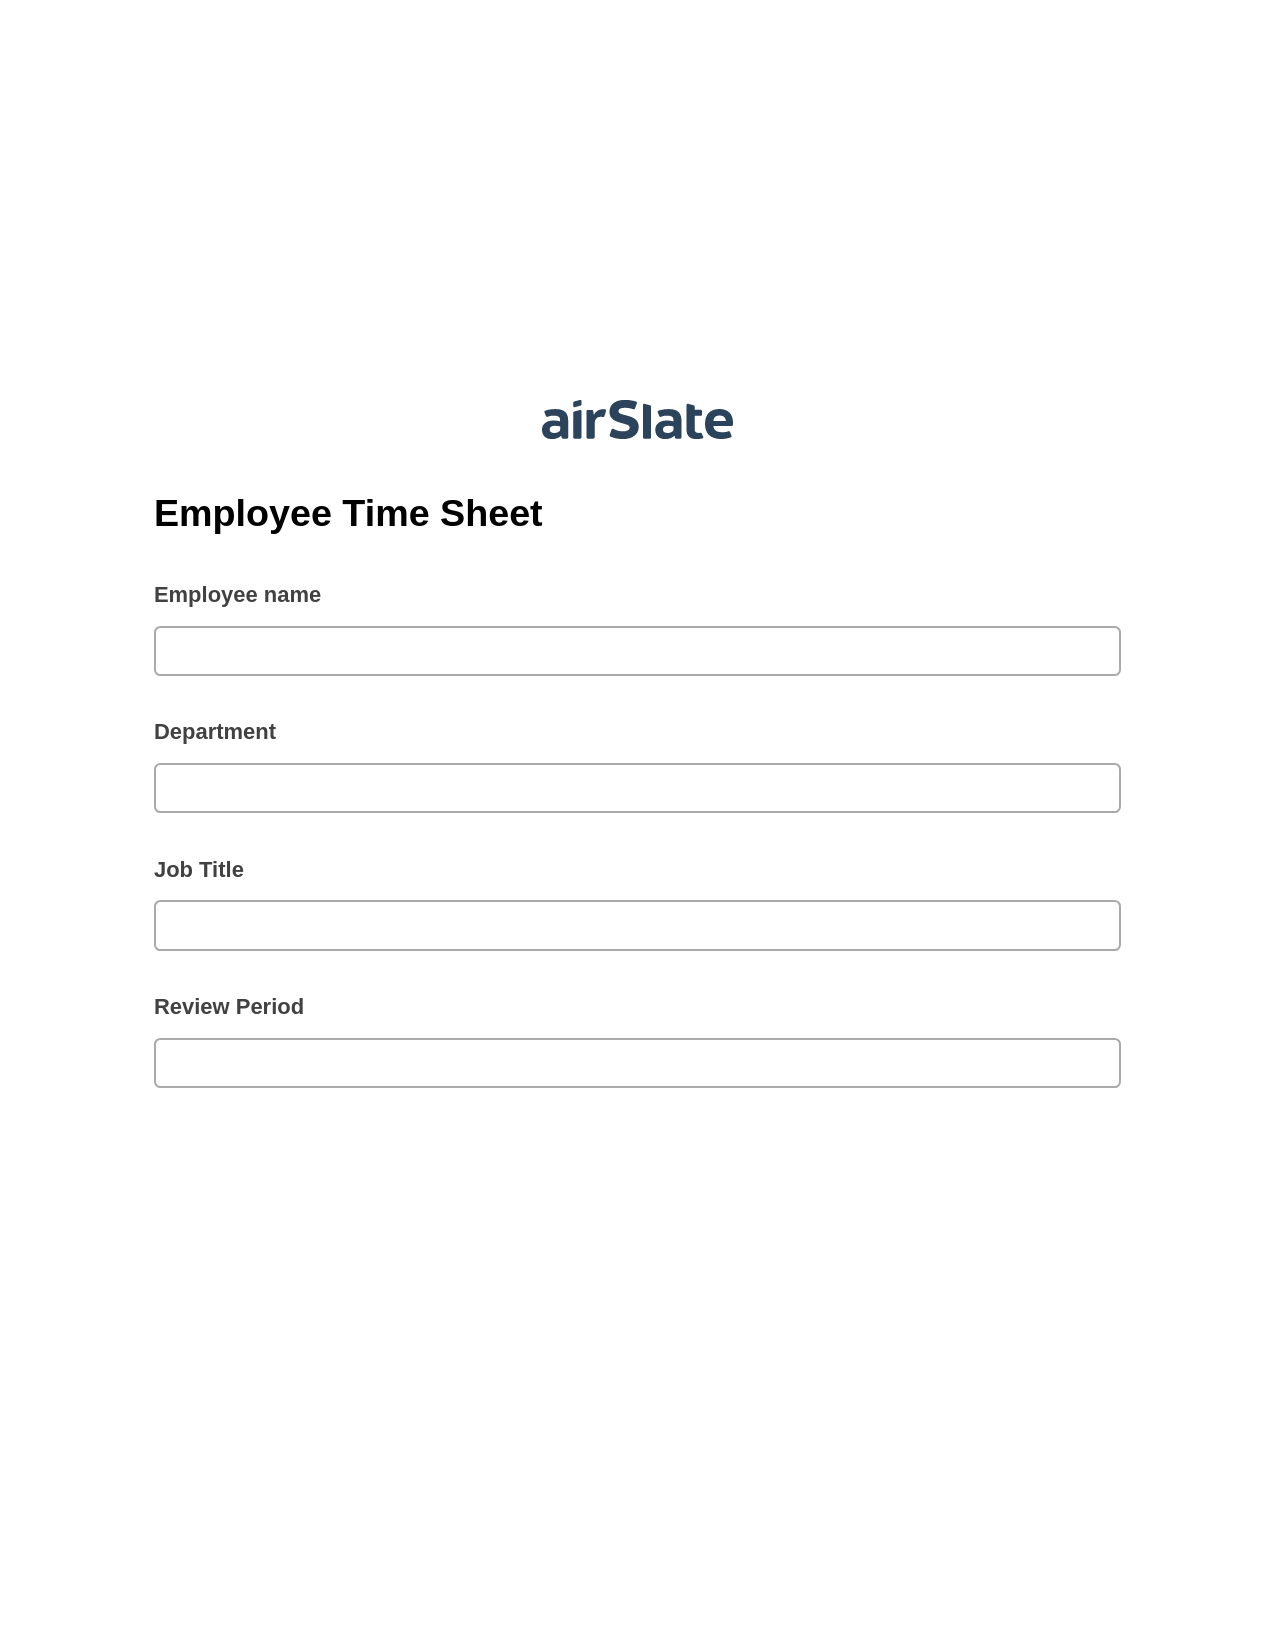 Employee Time Sheet System Bot - Slack Two-Way Binding Bot, Create slate from another Flow Bot, Archive to SharePoint Folder Bot